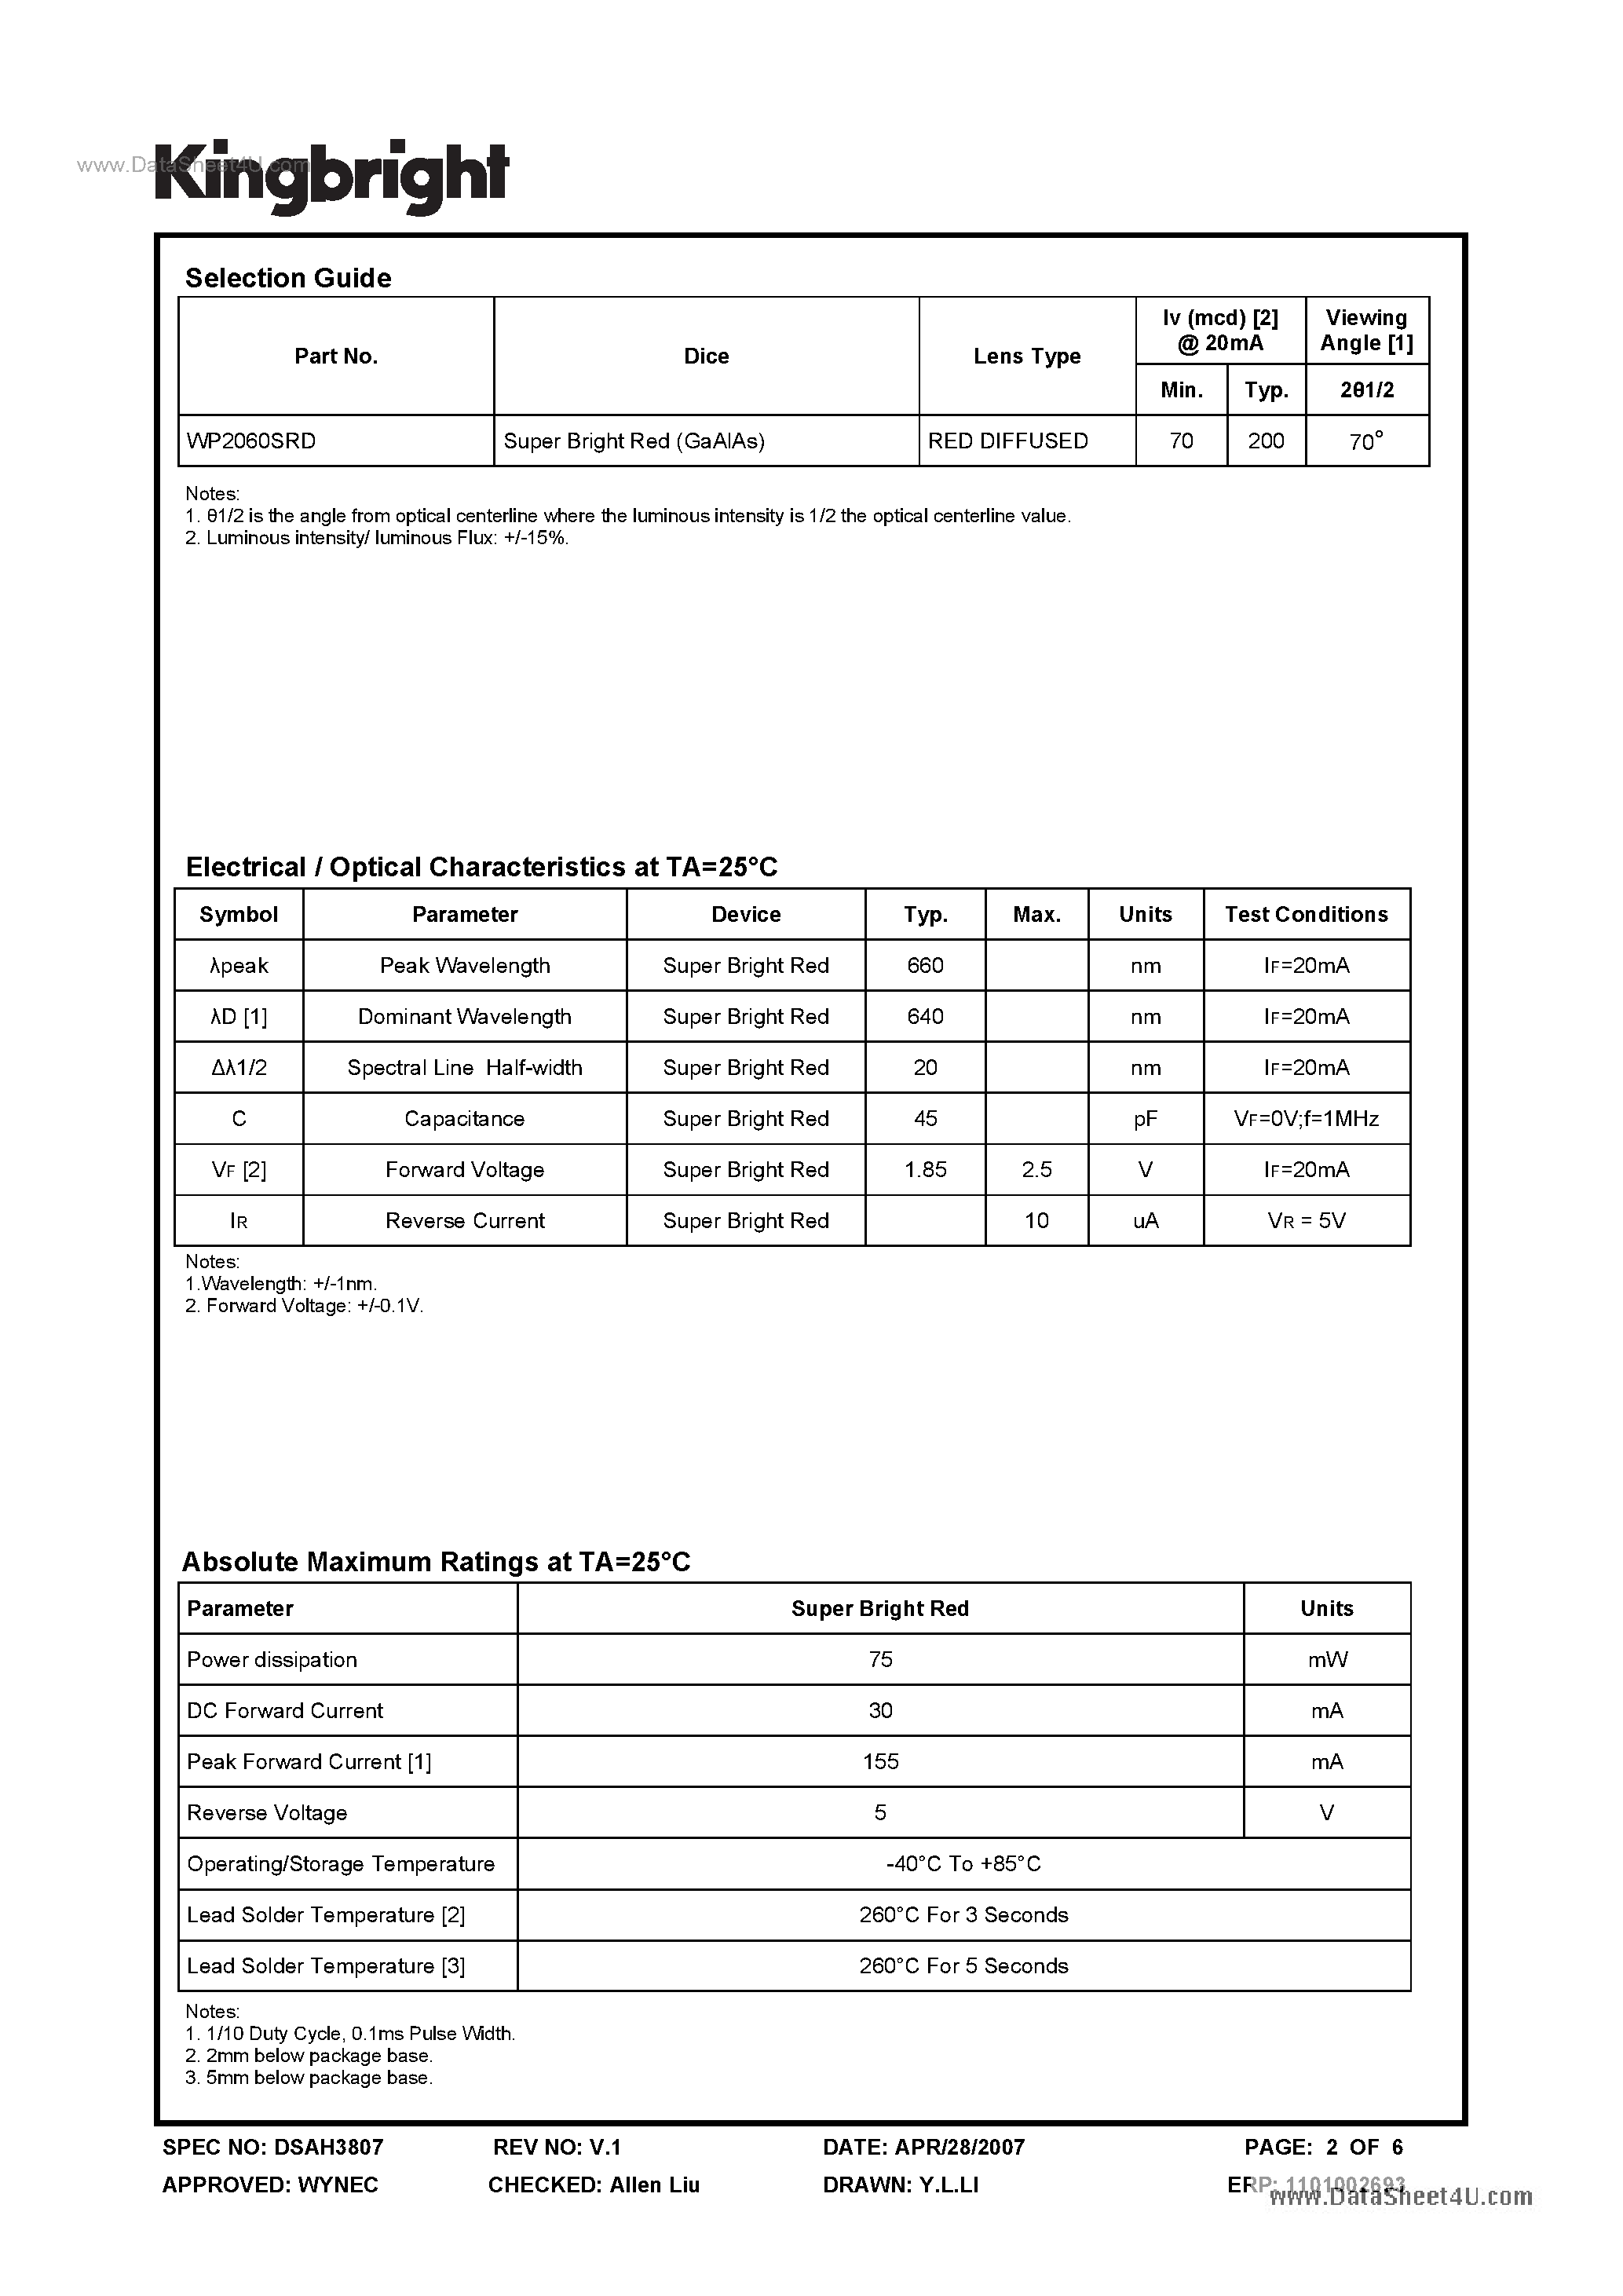 Datasheet WP2060SRD - SOLID STATE LAMP page 2